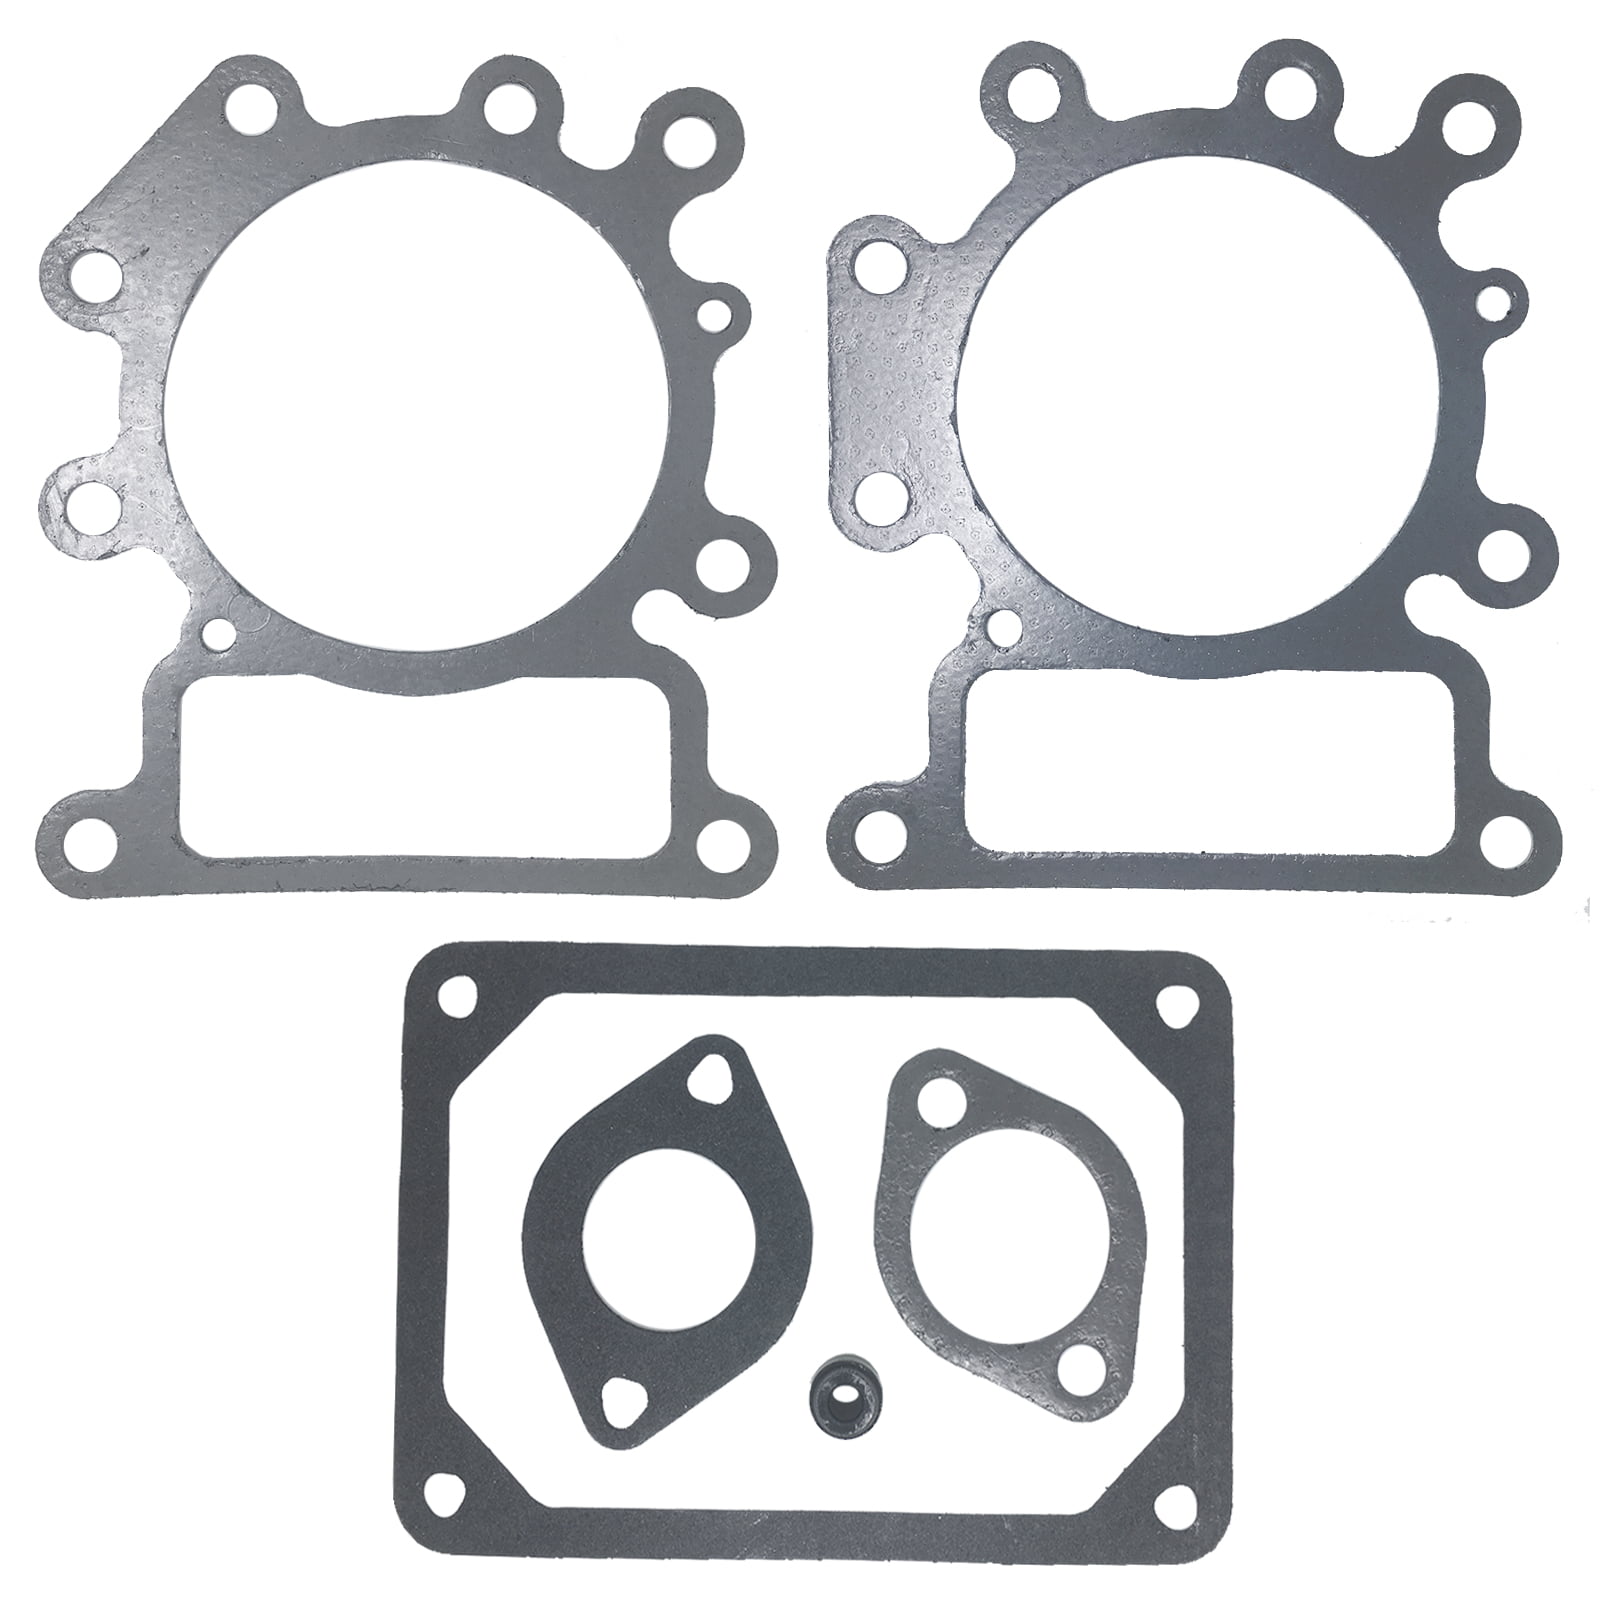 Details about   VALVE GASKET KIT FOR BRIGGS & STRATTON 794152 690190 ENGINE 331877 331977 31A607 